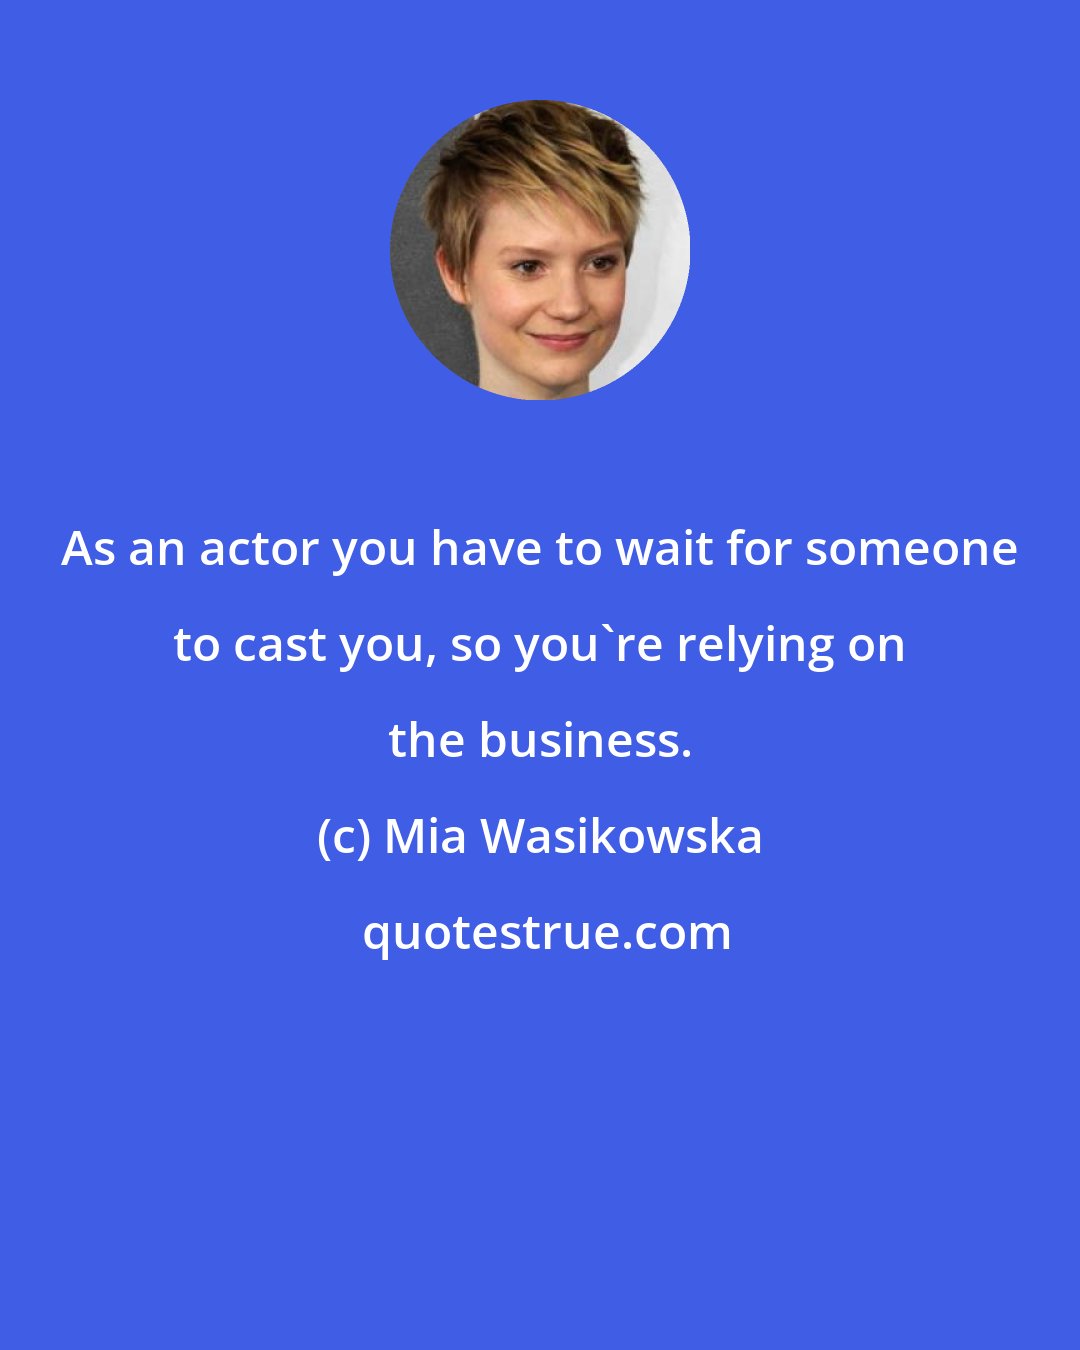 Mia Wasikowska: As an actor you have to wait for someone to cast you, so you're relying on the business.